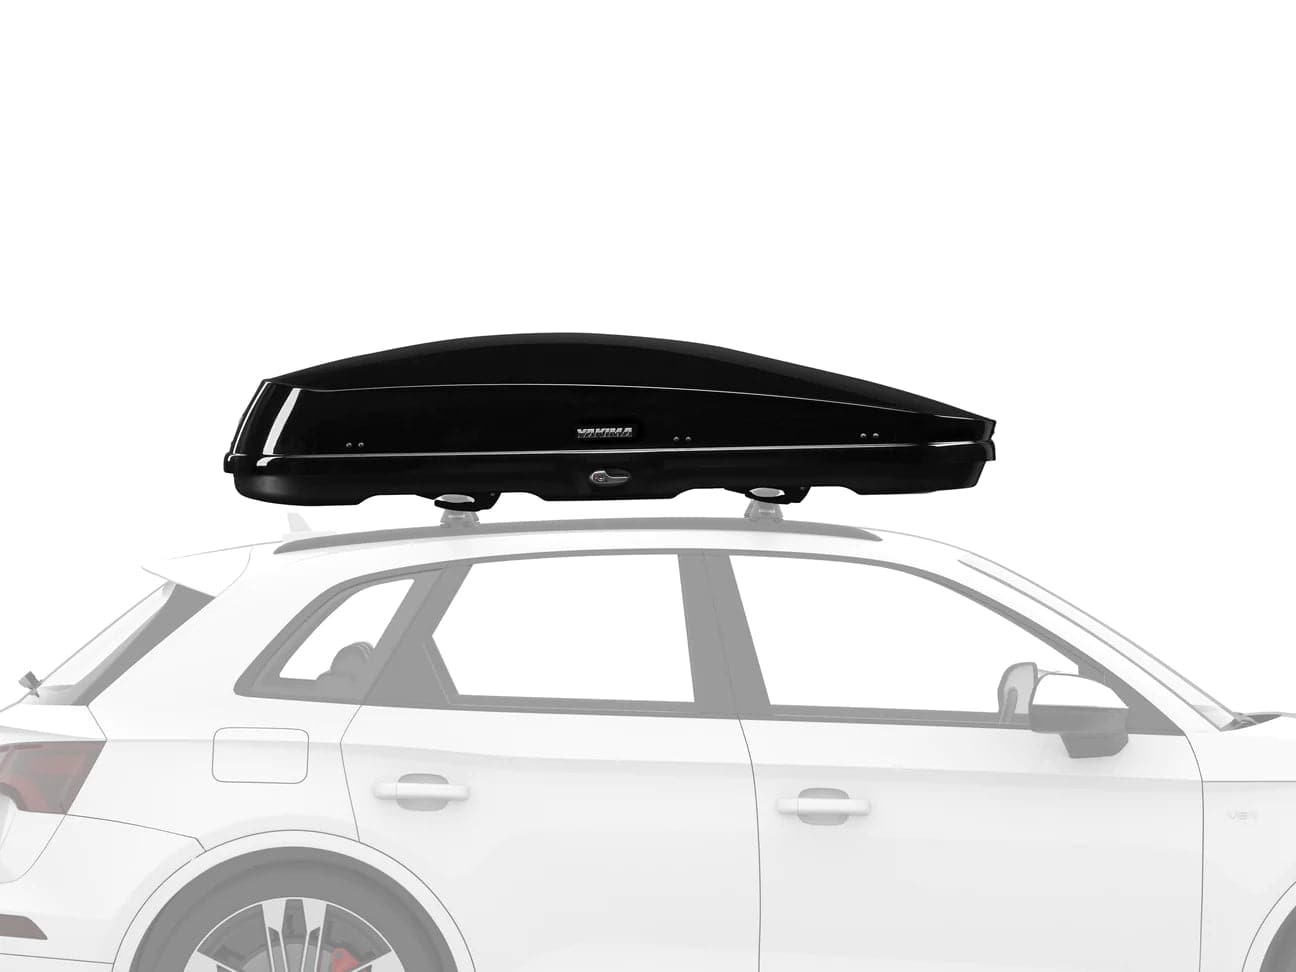 Featuring the GrandTour 16 cargo box manufactured by Yakima shown here from a third angle.